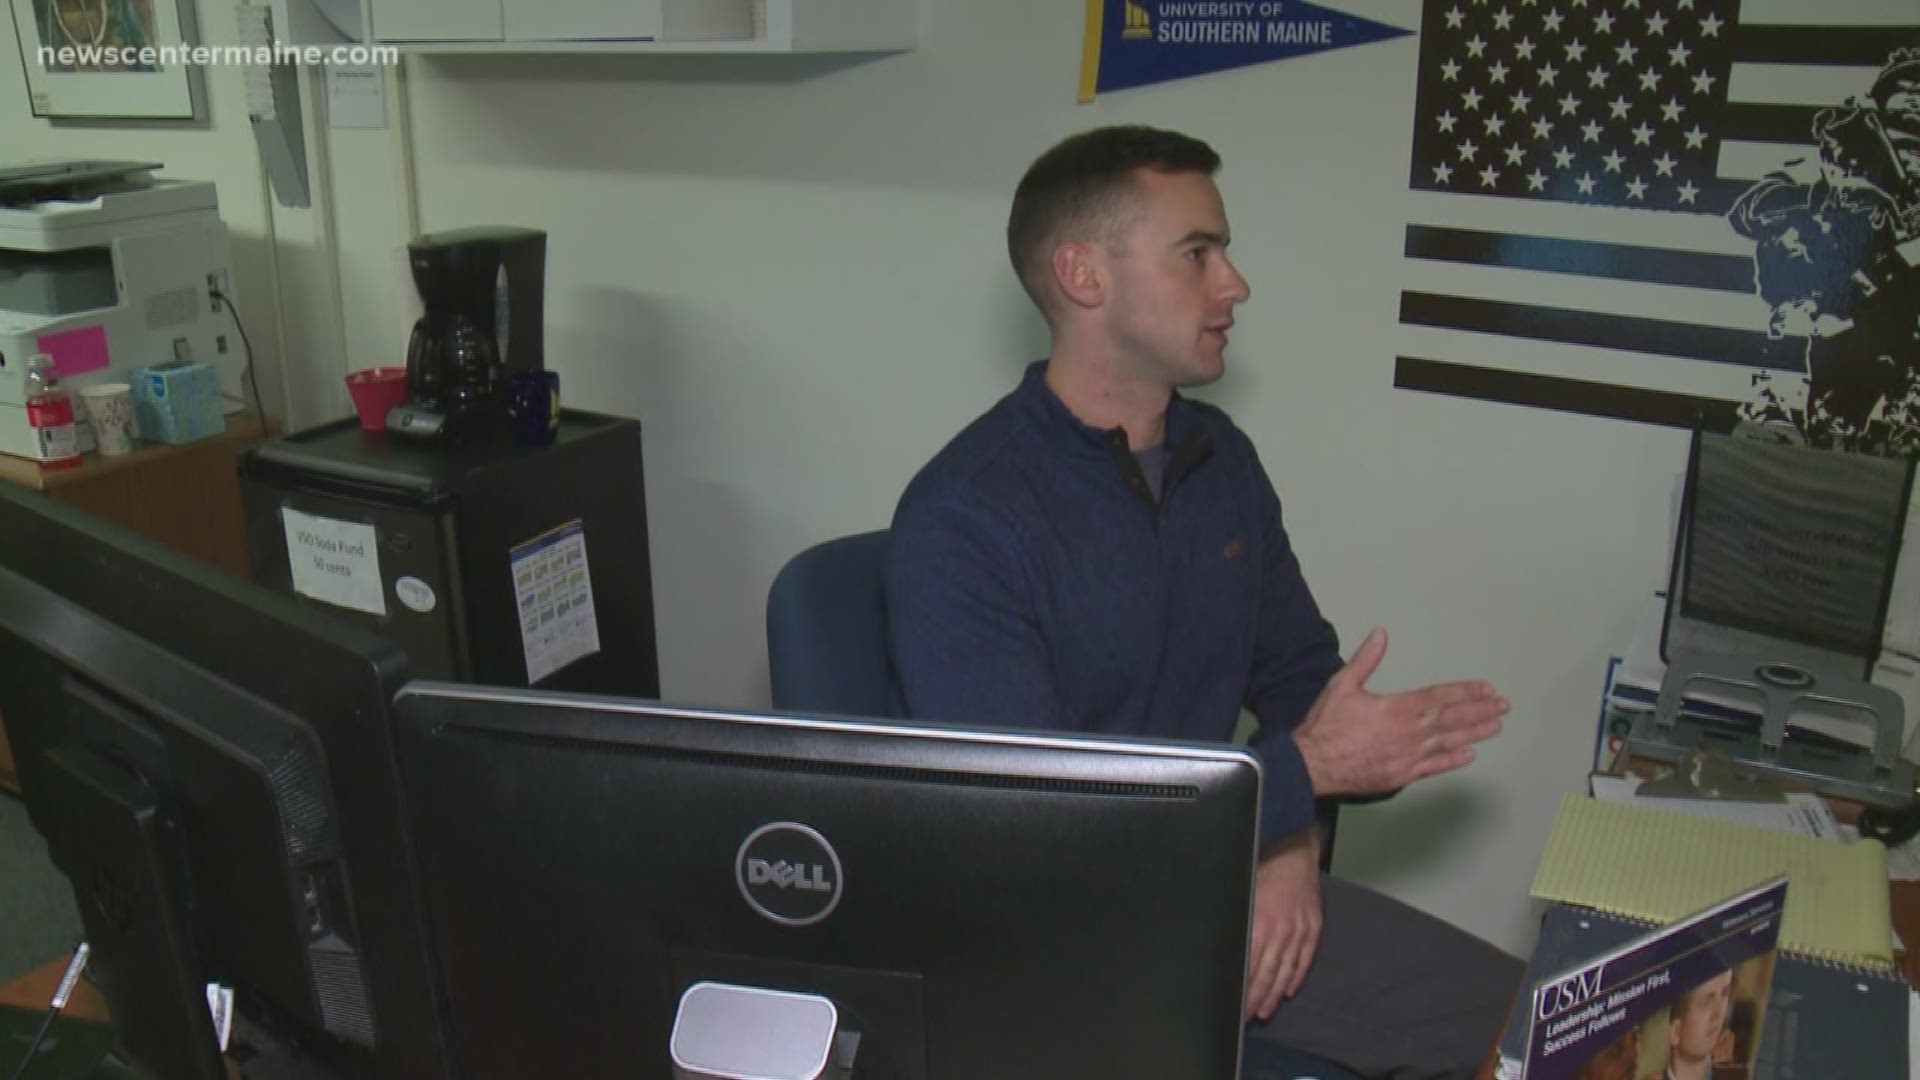 Vets say the could use more help with post-combat job skills